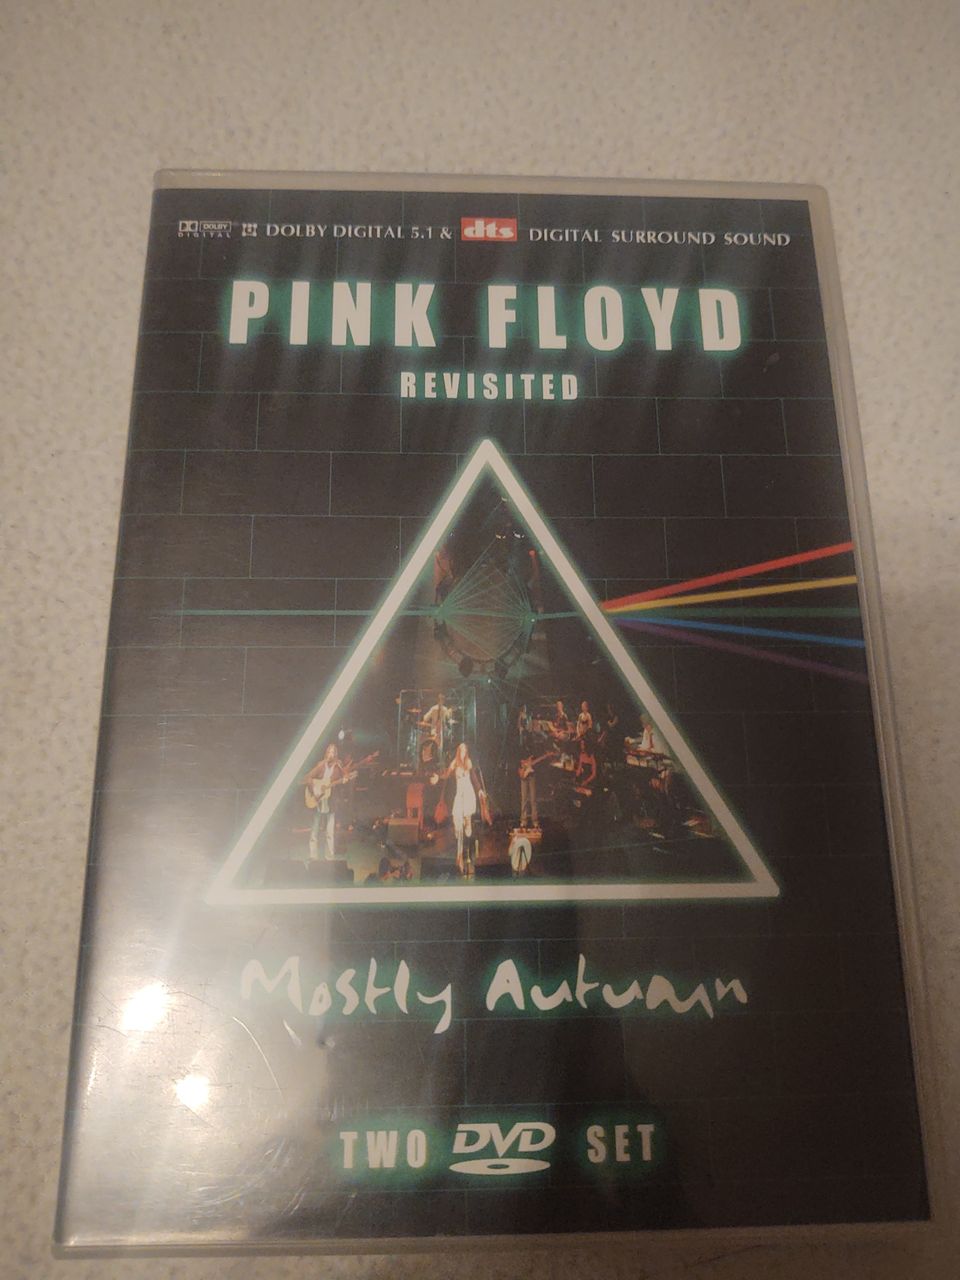 Mostly Autumn:Pink Floyd revisited